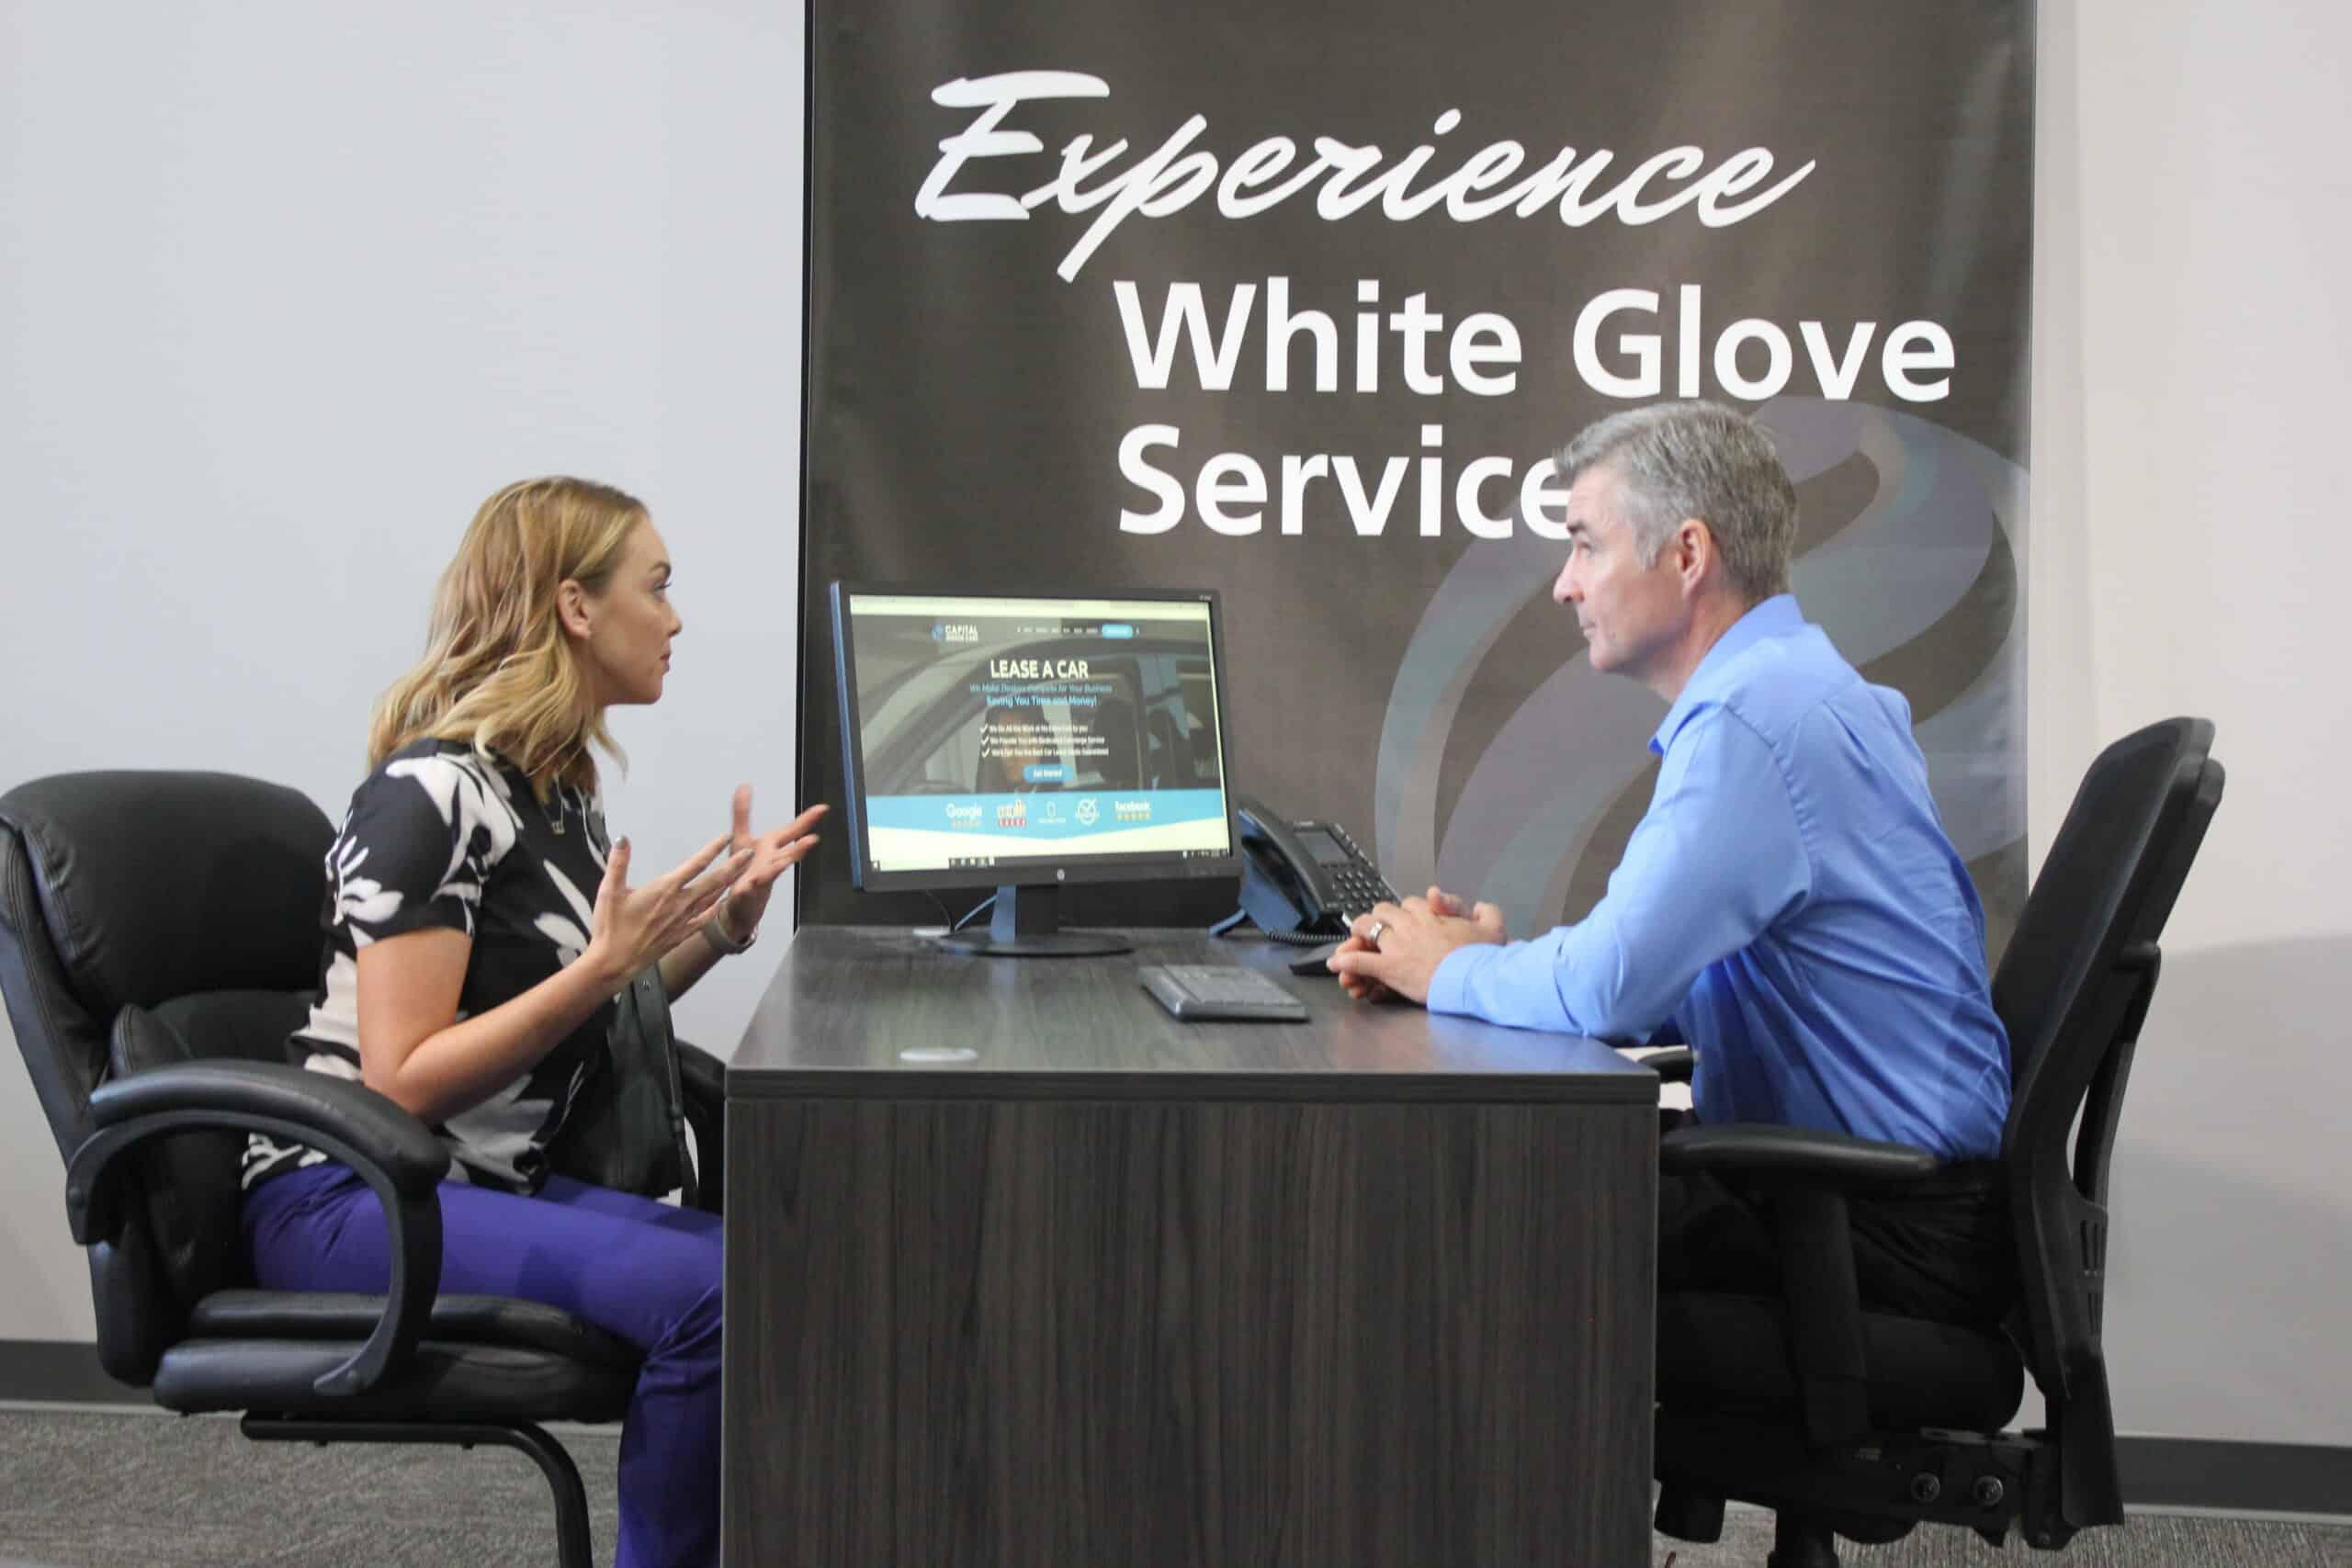 White Glove Service: Could This Phrase Change How You Shop For Cars?